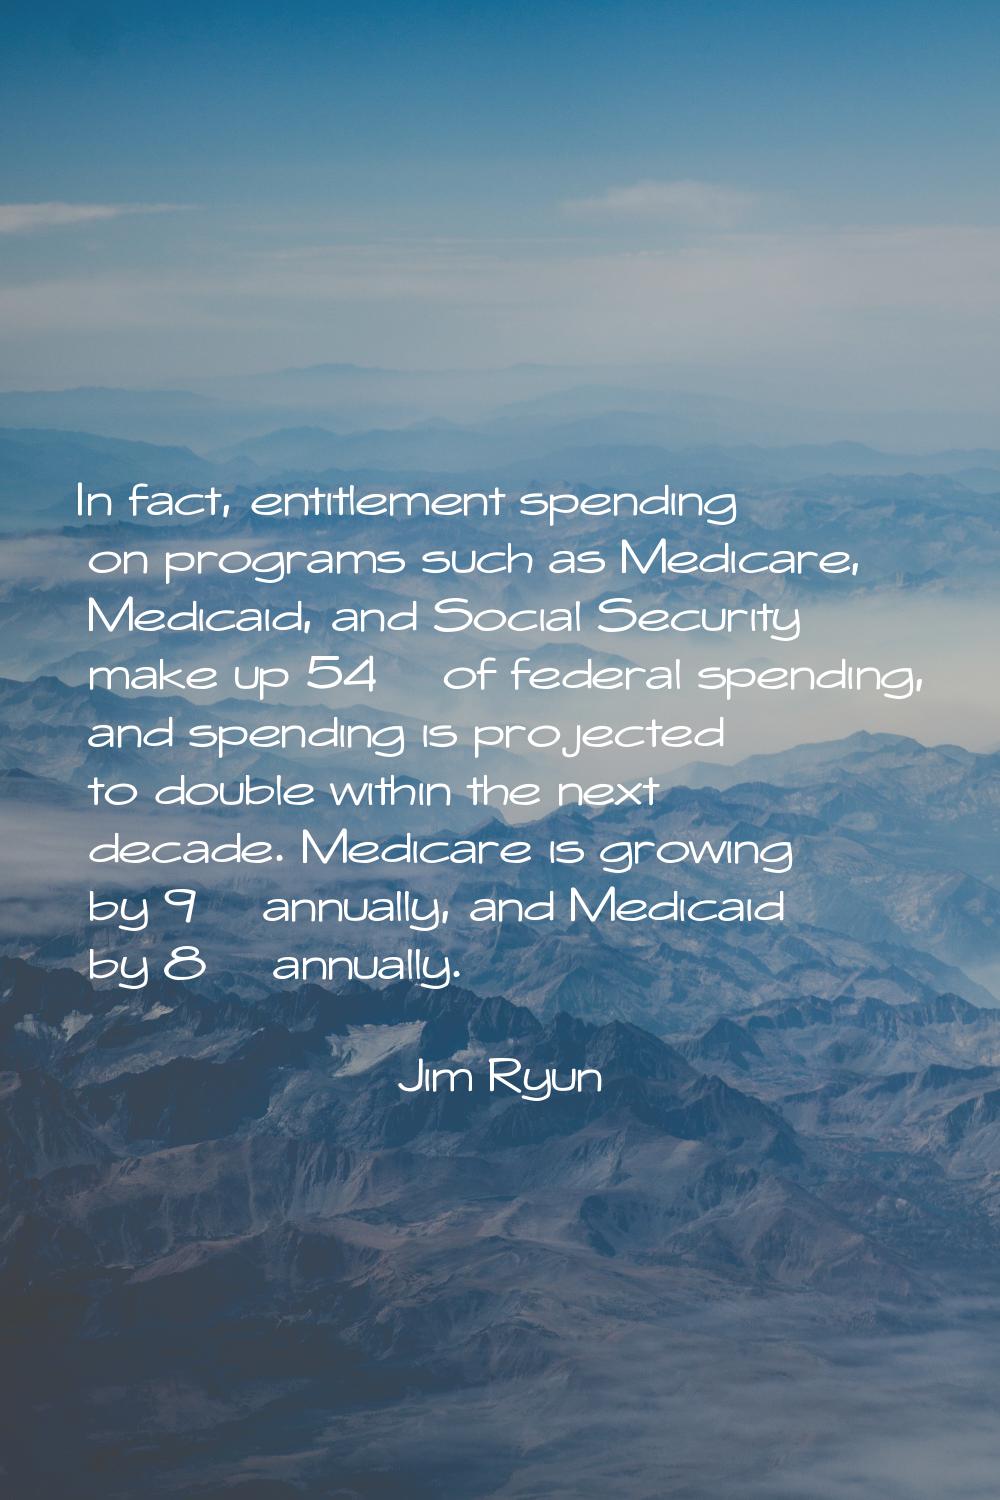 In fact, entitlement spending on programs such as Medicare, Medicaid, and Social Security make up 5